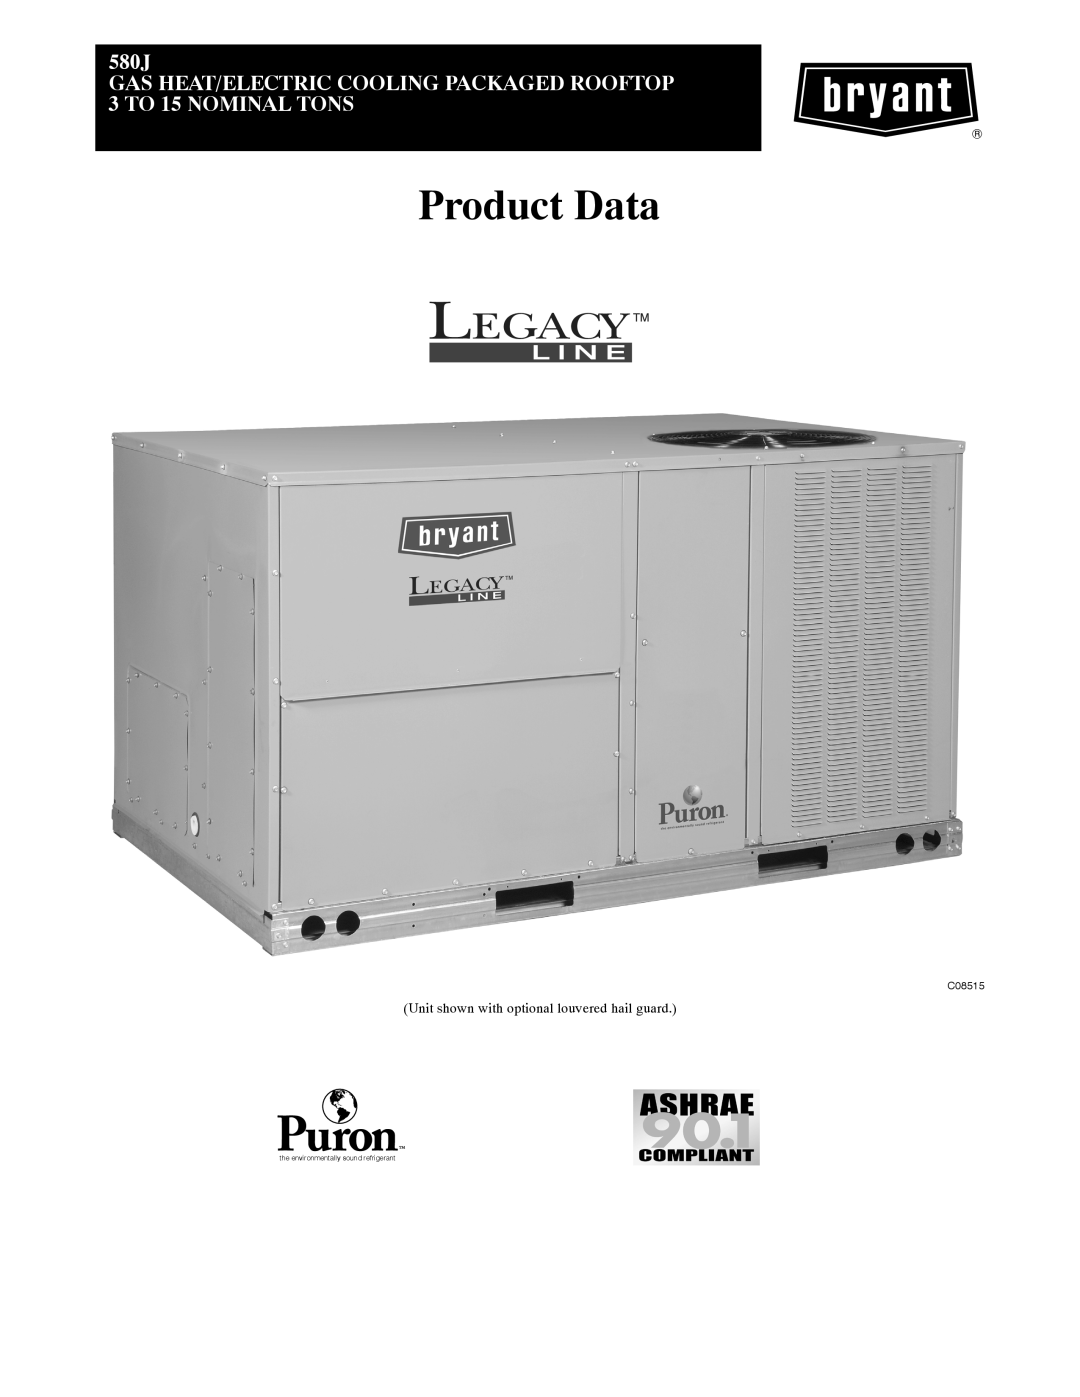 Bryant 580J manual Product Data, Unit shown with optional louvered hail guard, C08515 